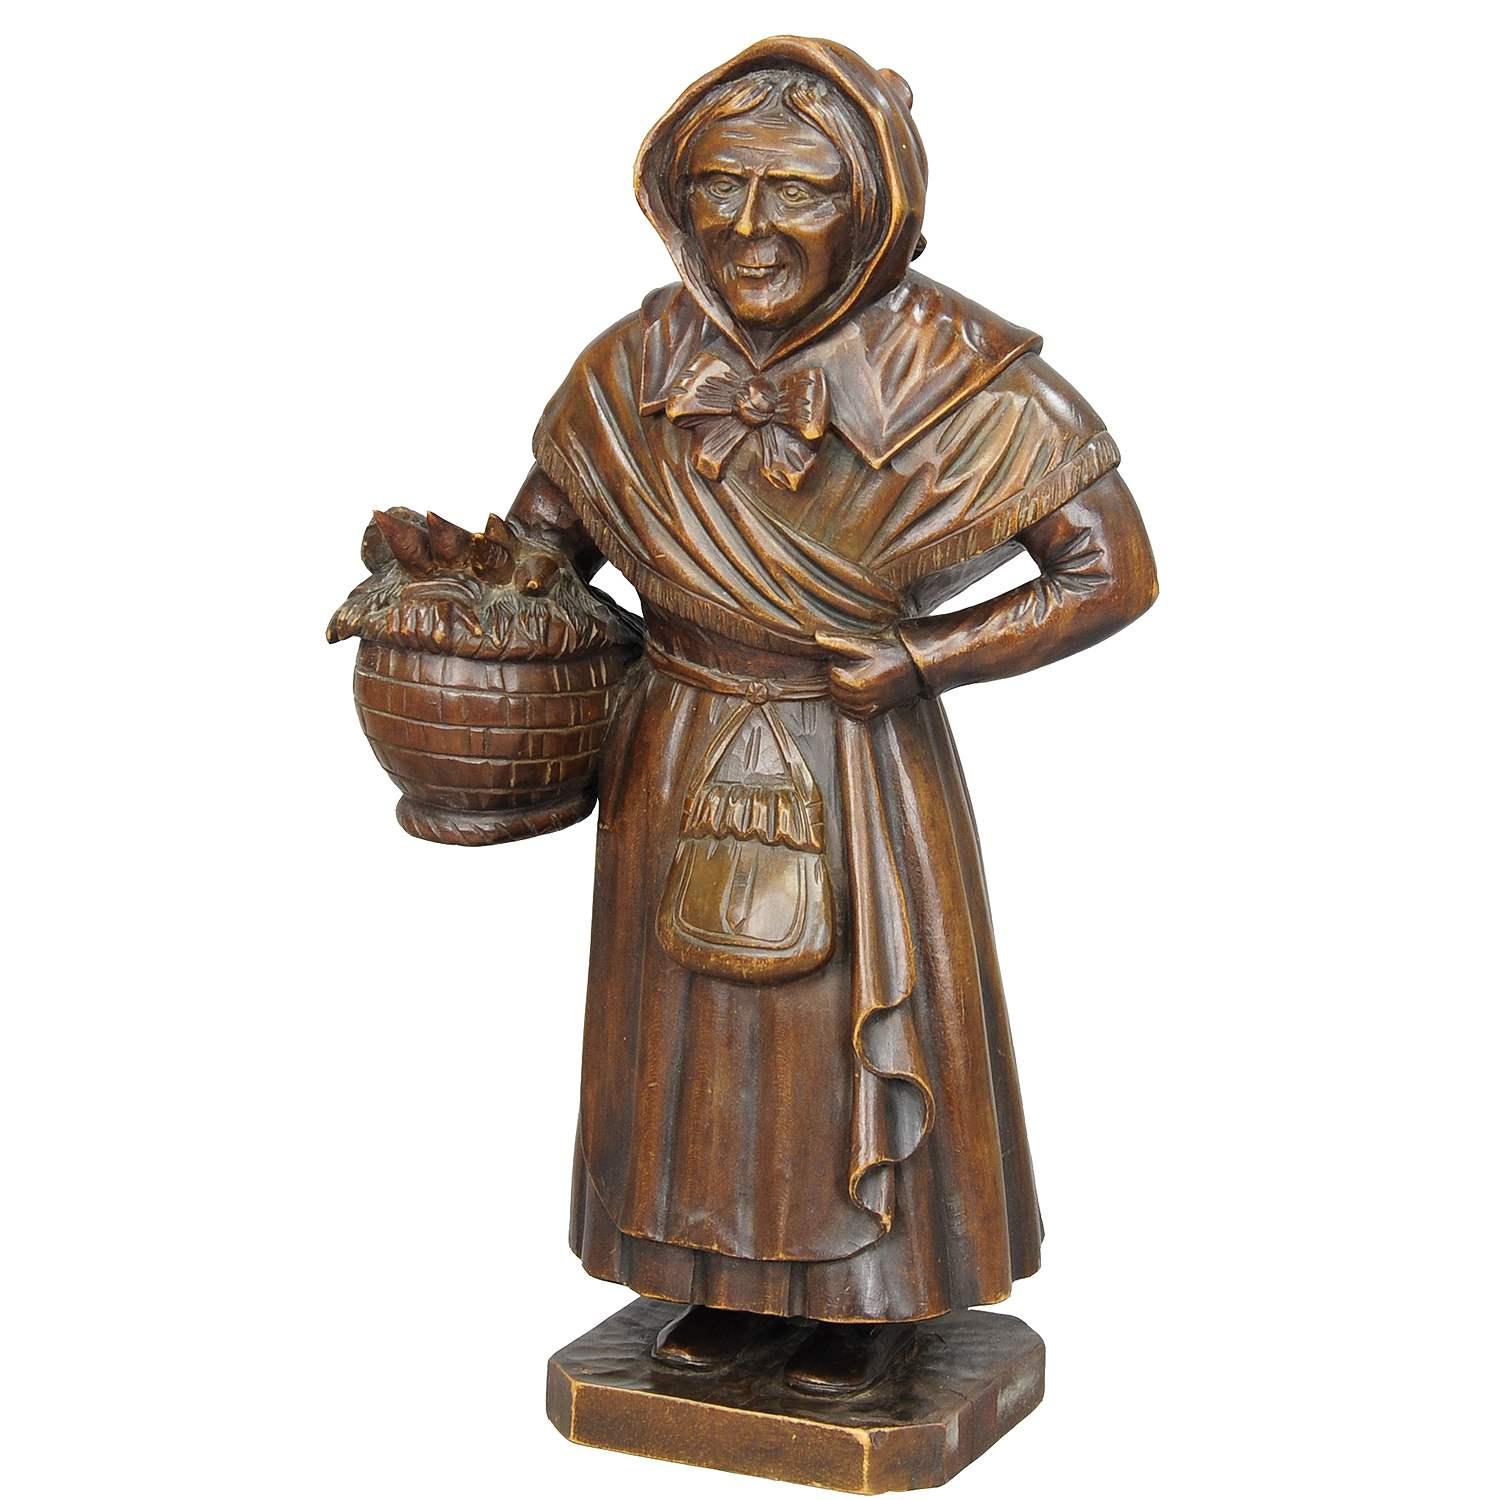 Antique Wooden Carved Sculpture of a Folksy Countrywoman

A large traditional Black Forest style woodcarving of a farmer´s wife. Hand carved in Germany around 1920. A great addition to the rustic interior. Very good condition. Please contact us for